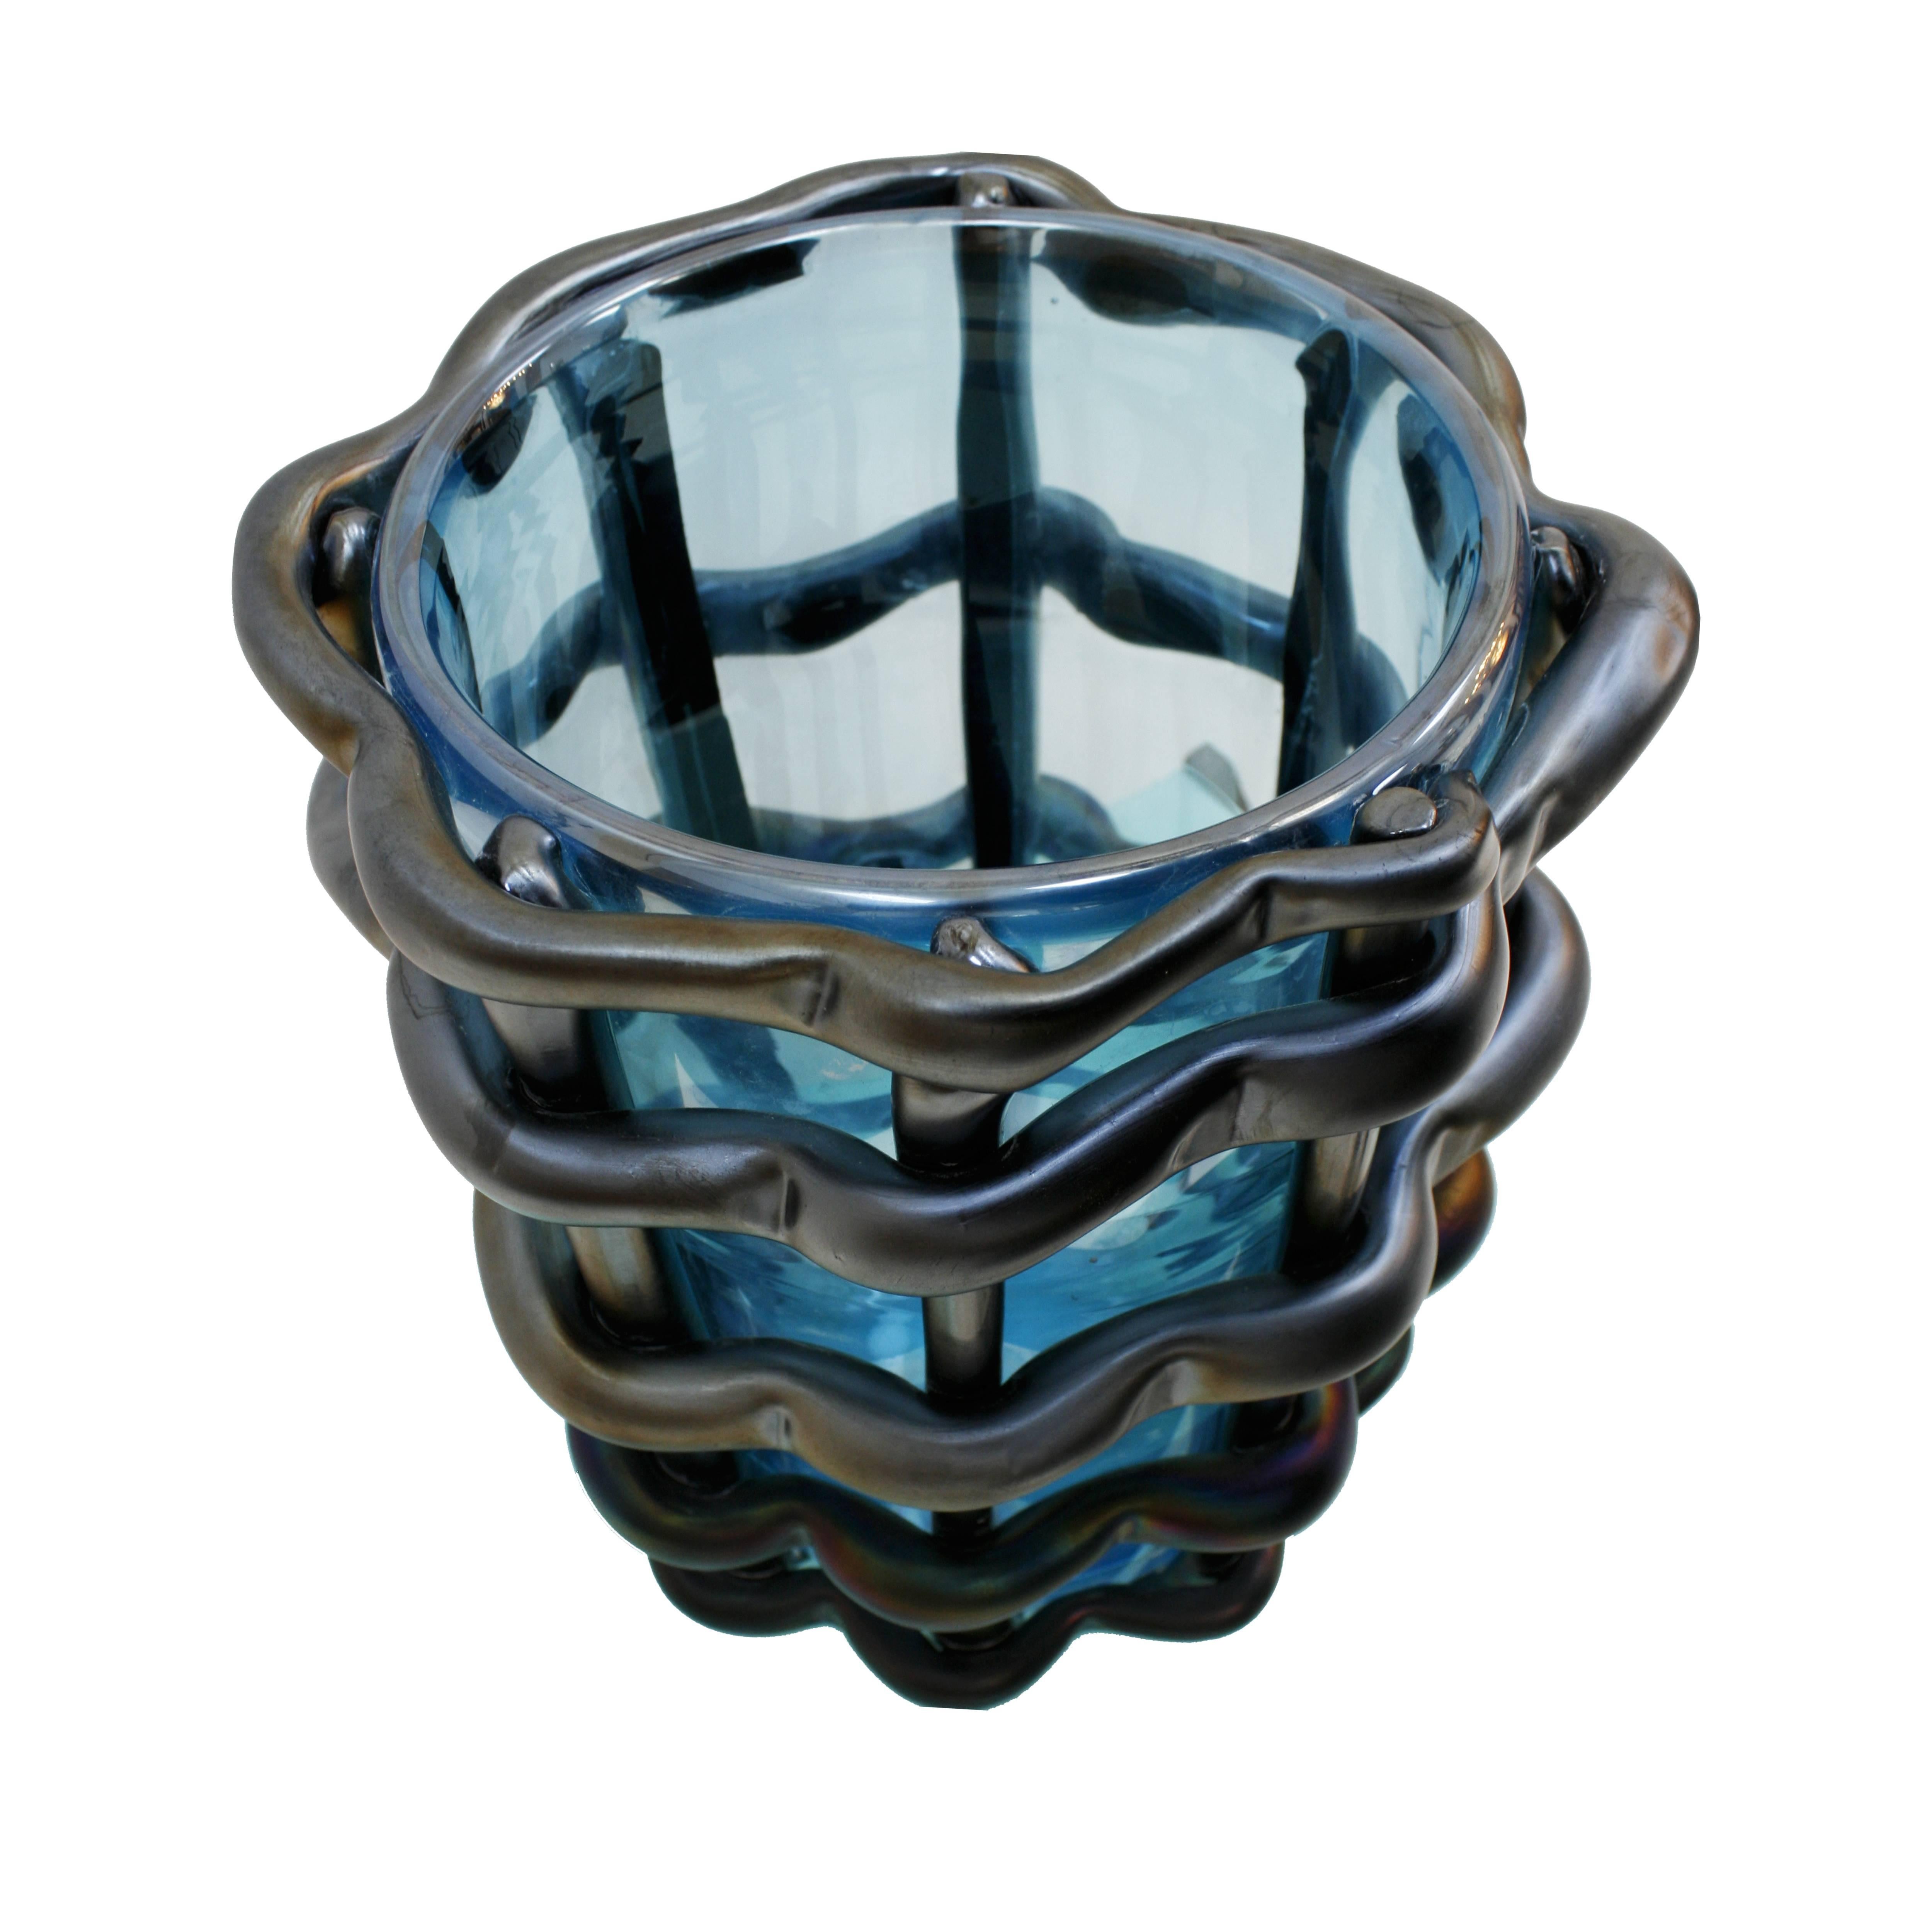 Vase designed by Seguso Murano, handcrafted in blue Murano glass and iridescent grey.